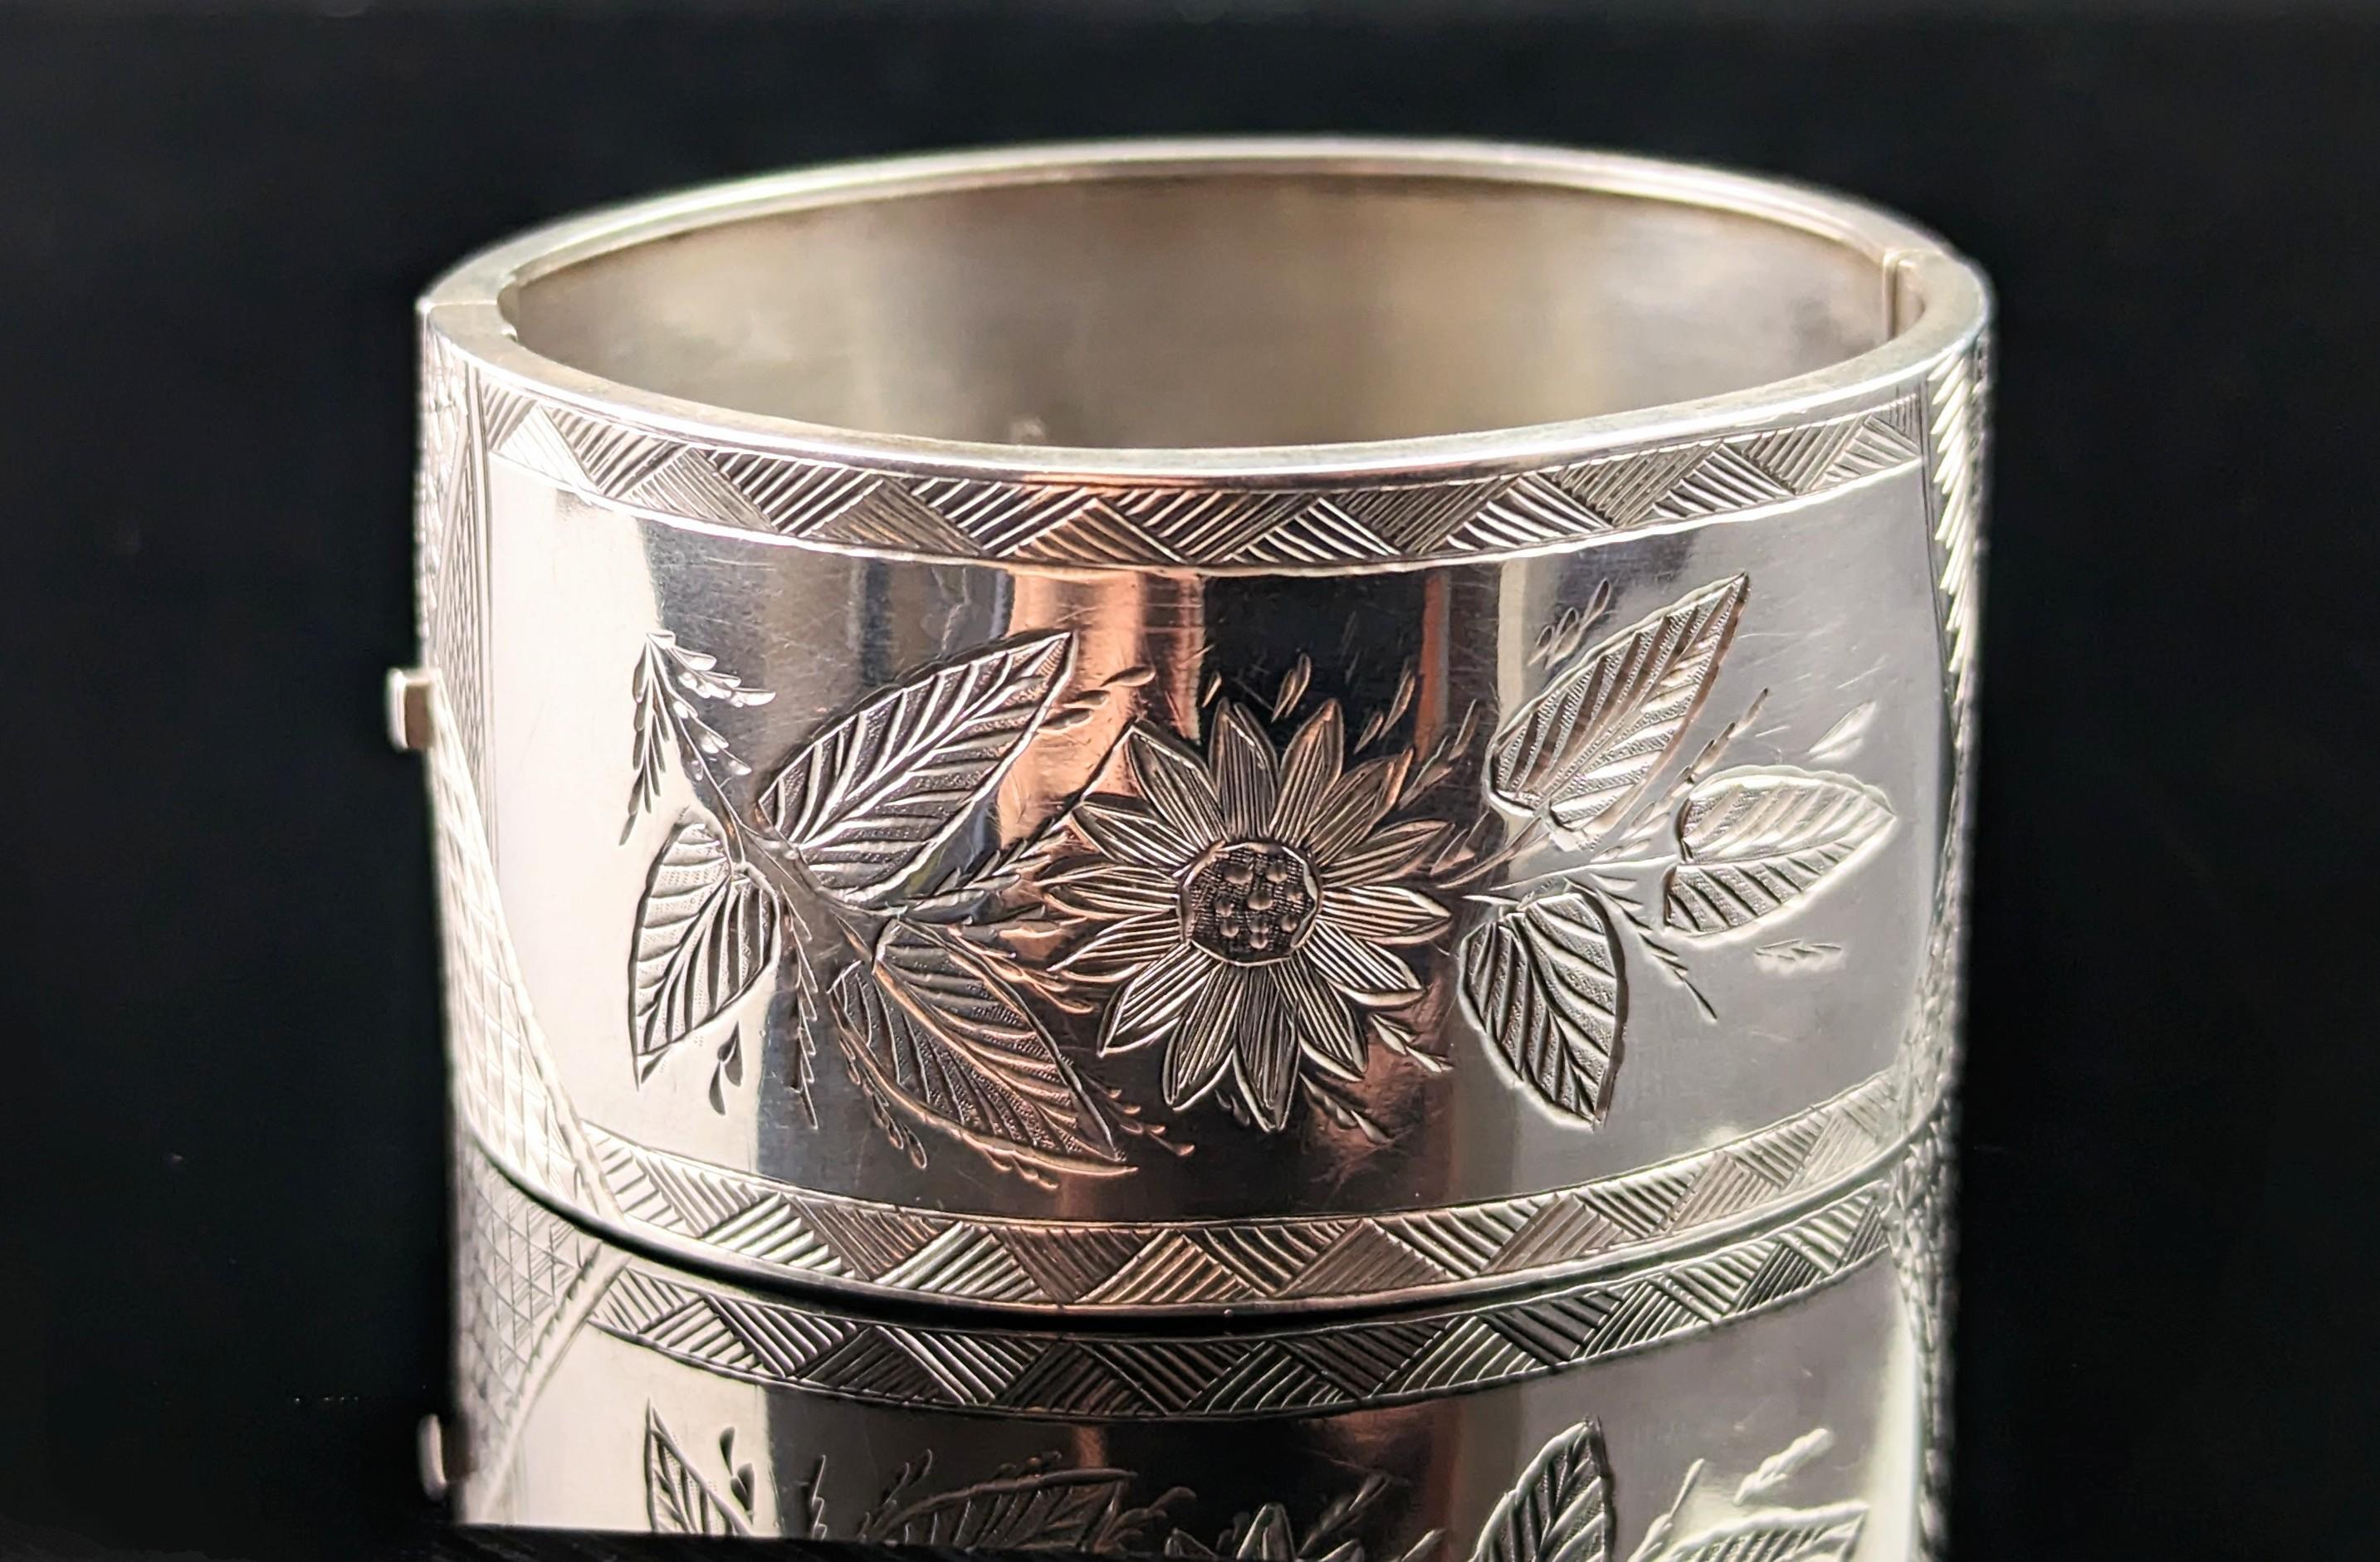 You can't help but fall in love with this gorgeous antique, Victorian era, sterling silver chunky cuff bangle.

Engraved in the aesthetic manner with a smooth polished reverse, it features a sunflower to the front.

A very well made and designed